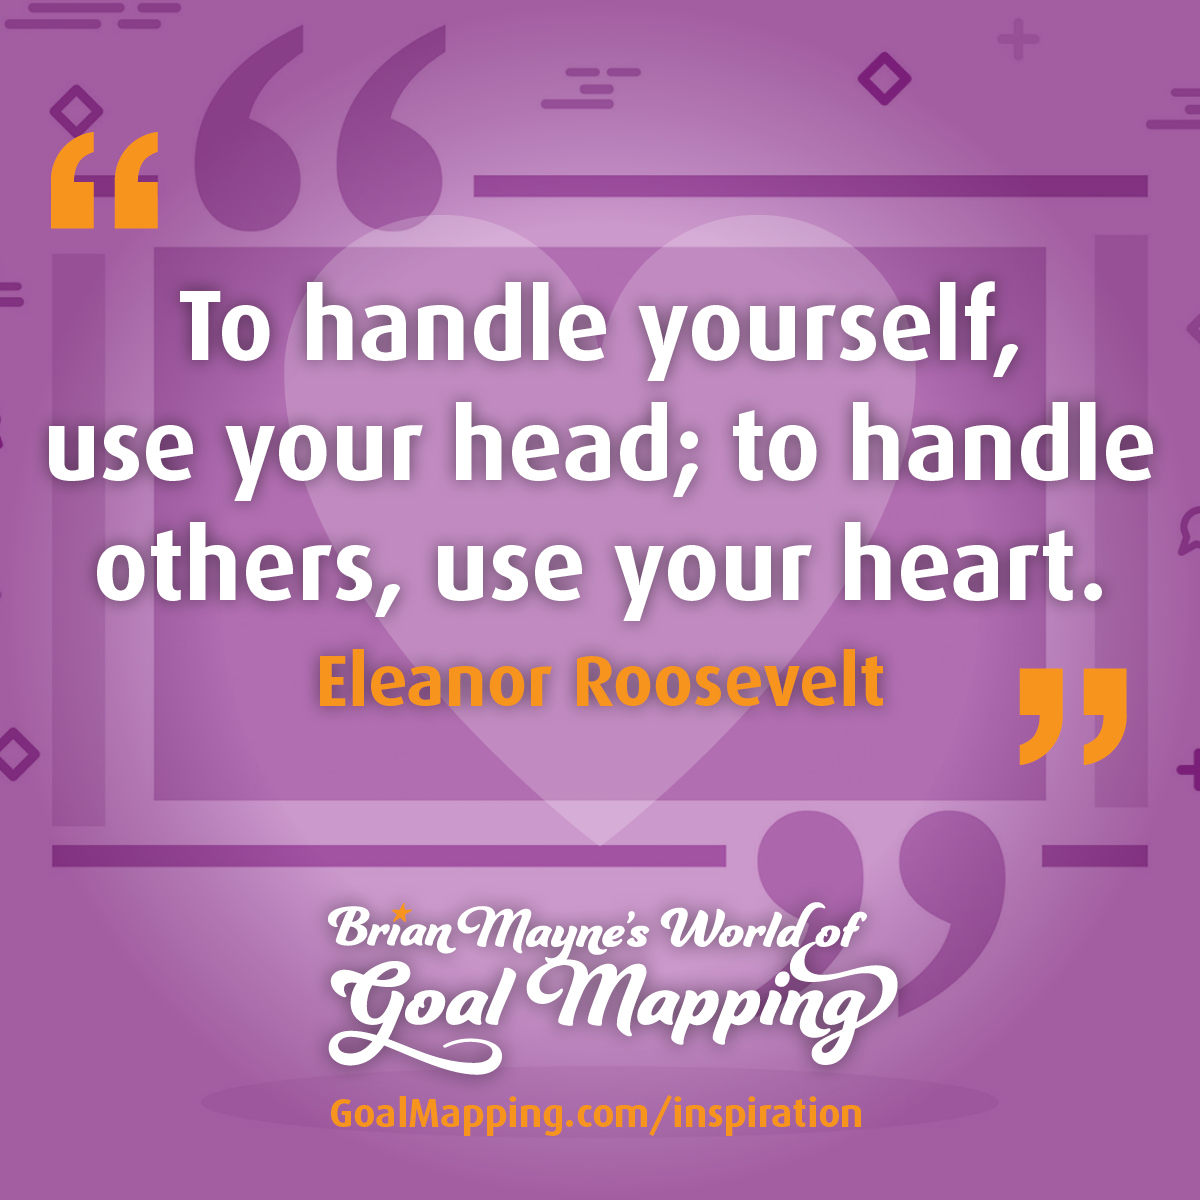 "To handle yourself, use your head; to handle others, use your heart." Eleanor Roosevelt